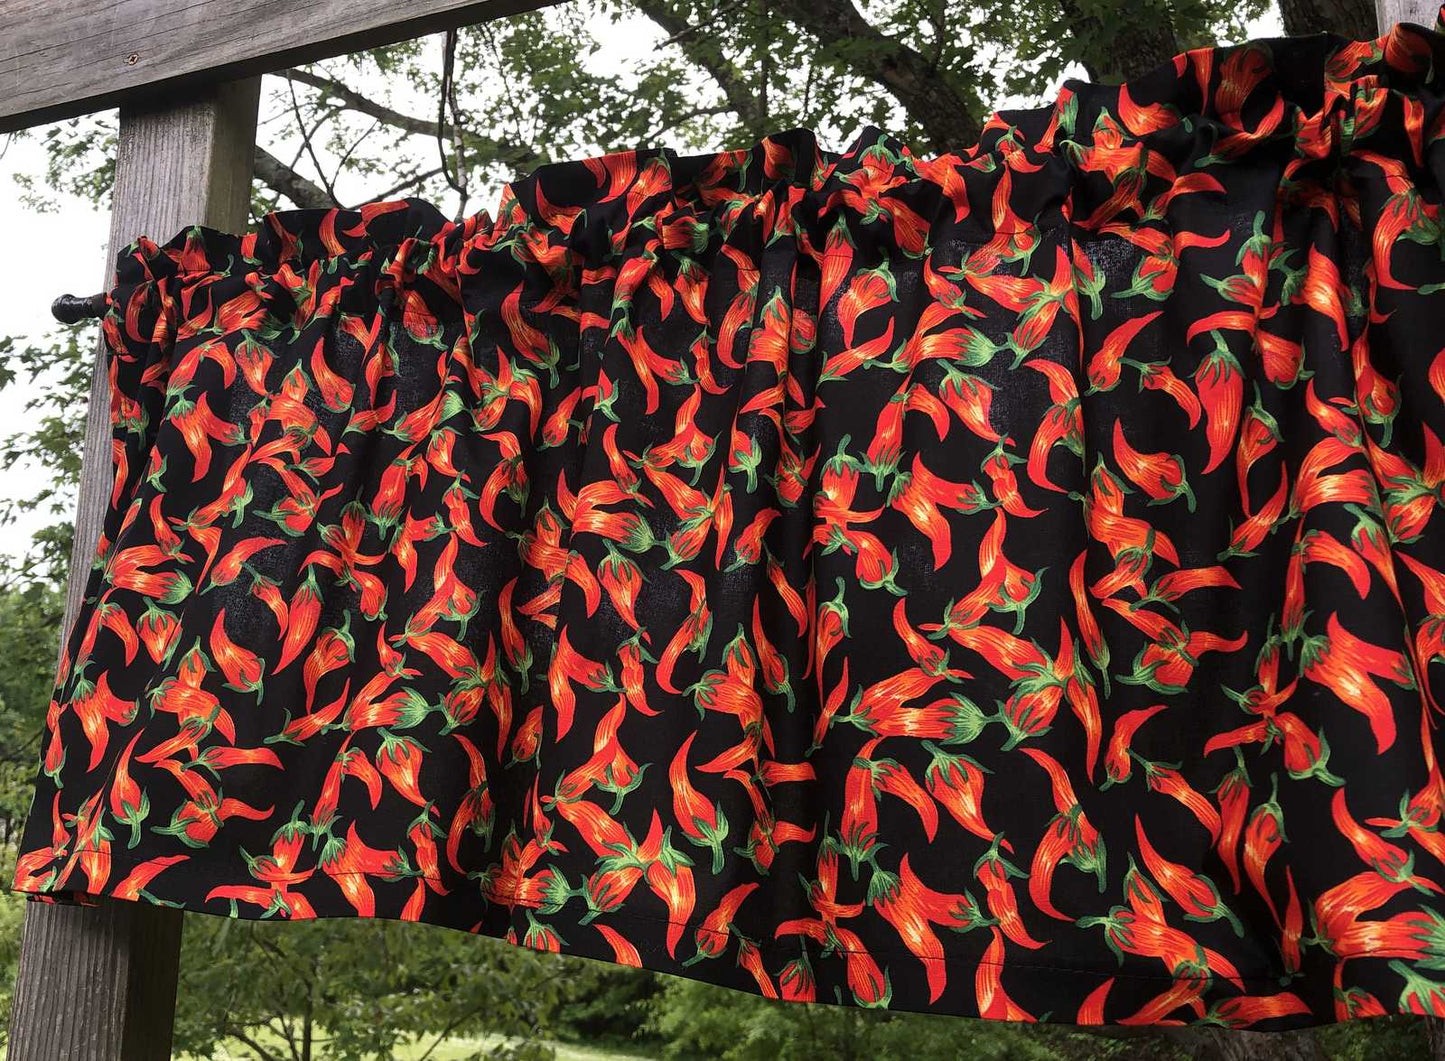 Red Hot Chili Peppers on Black Custom Sewn Handcrafted Curtain Valance NEW